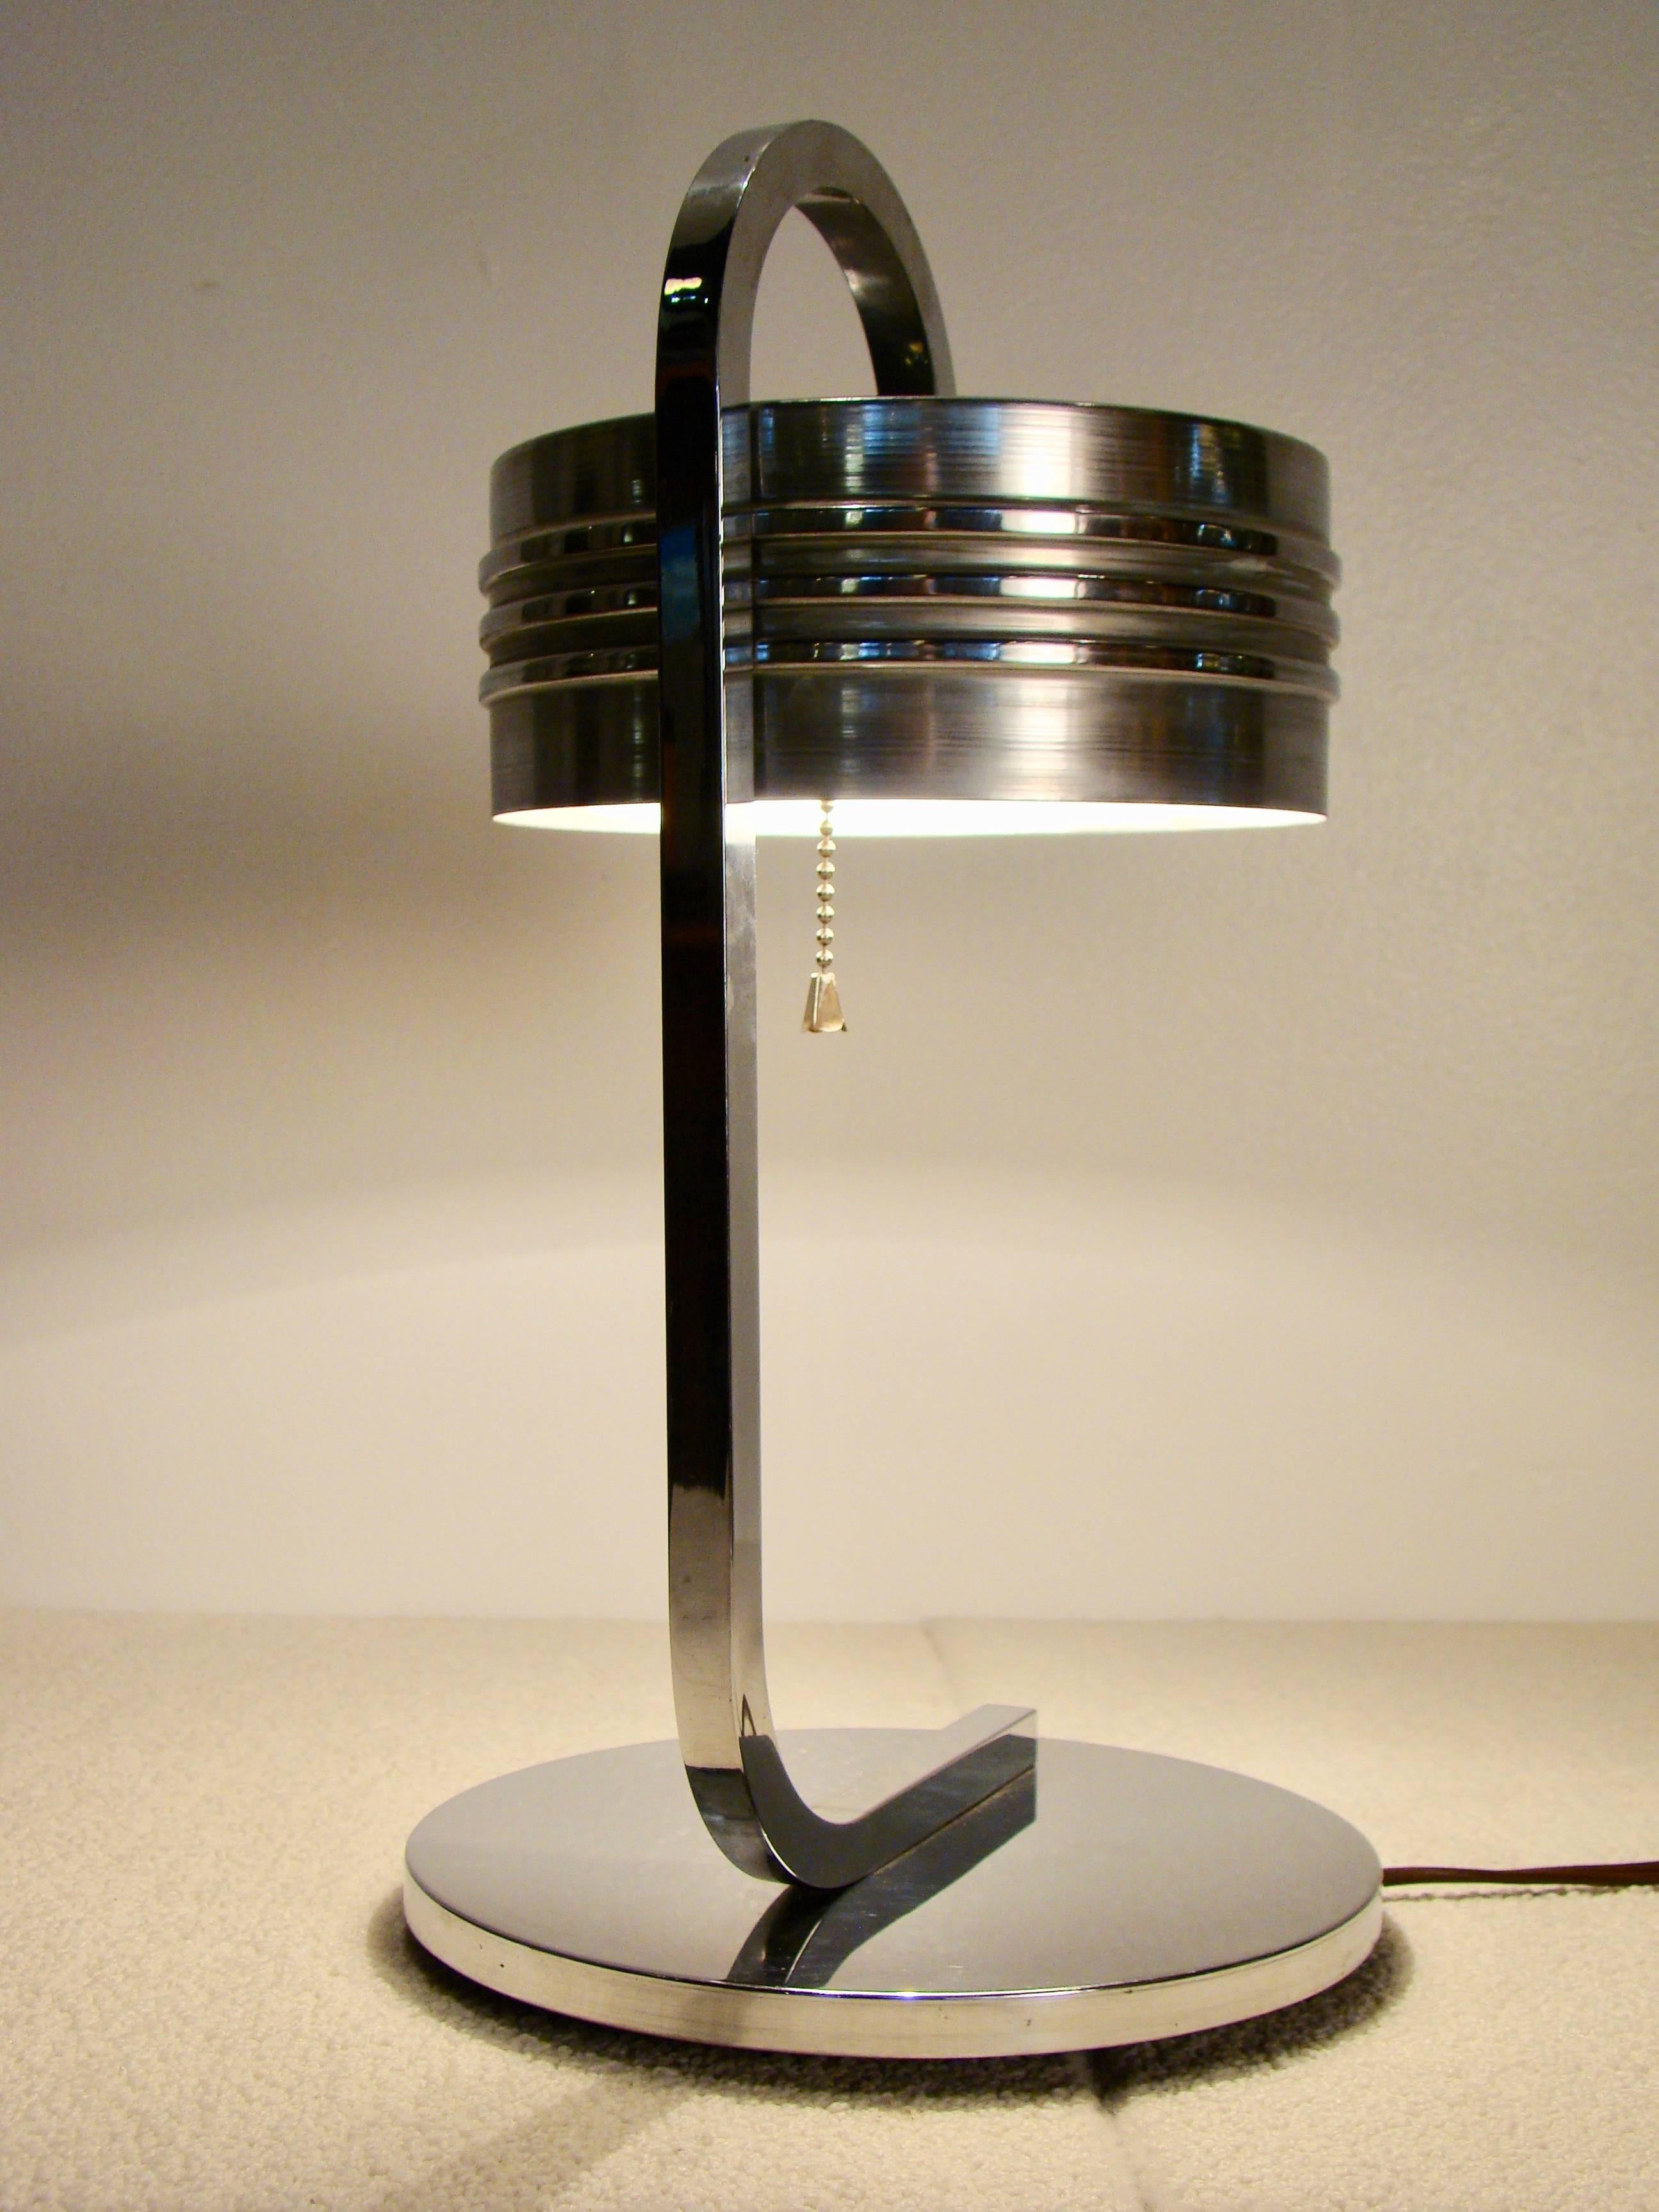 Exceptional Art Deco streamline chrome table lamp, circa 1930s. Beautiful from every angle. Switch is a pull chain.